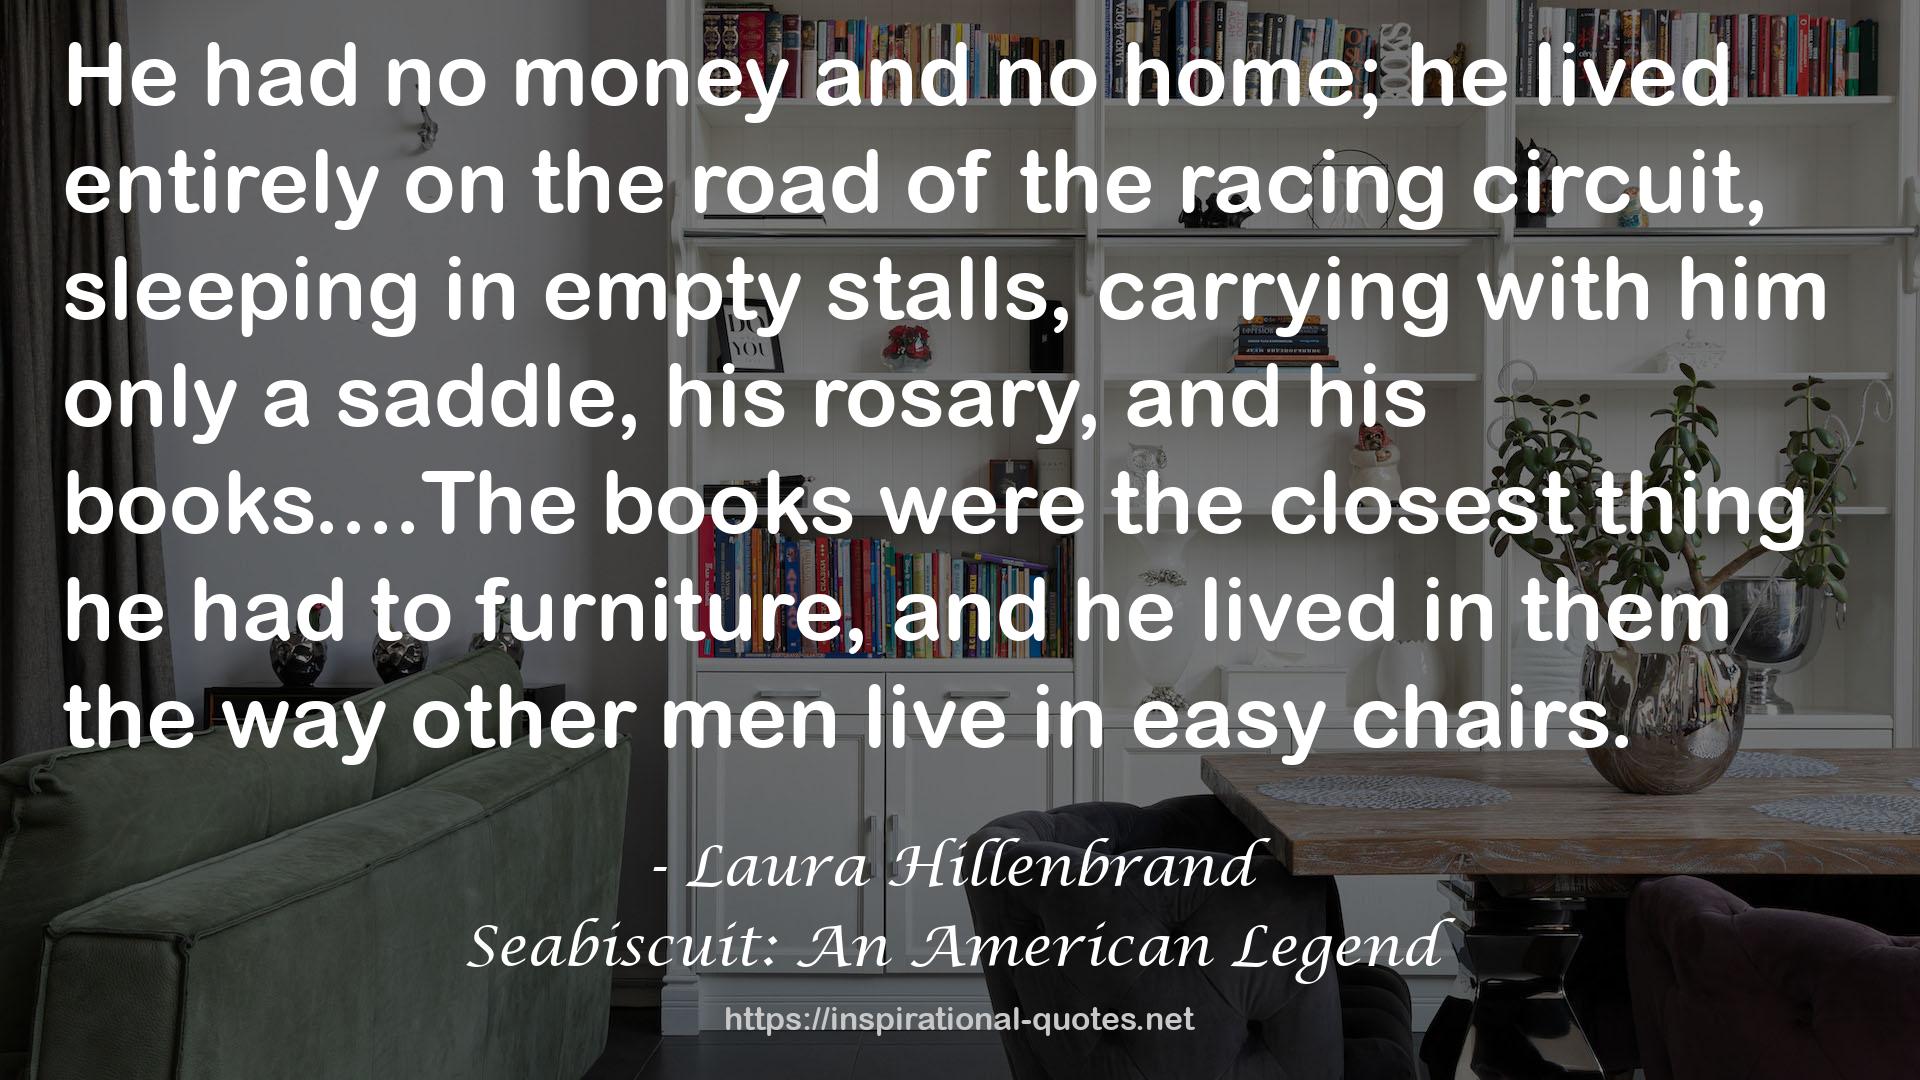 Seabiscuit: An American Legend QUOTES